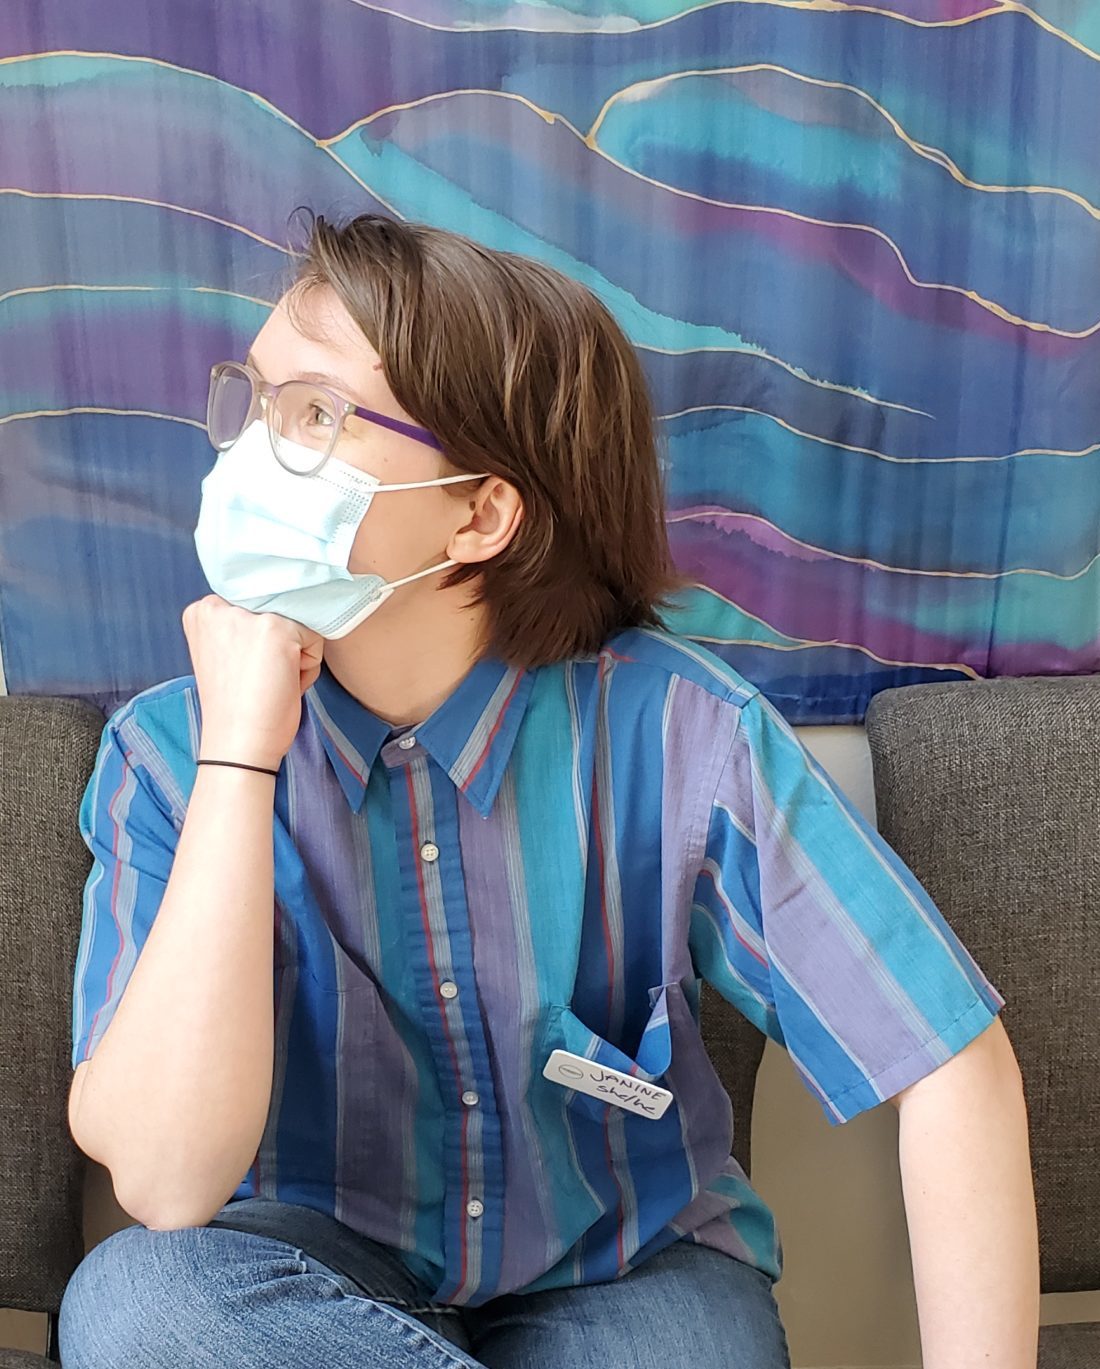 Janine, a white person with brown hair past their ears, purple glasses, and a surgical mask, sits with their chin perched on their fist. They wear a button-up shirt with vertical blue, purple, and red stripes.